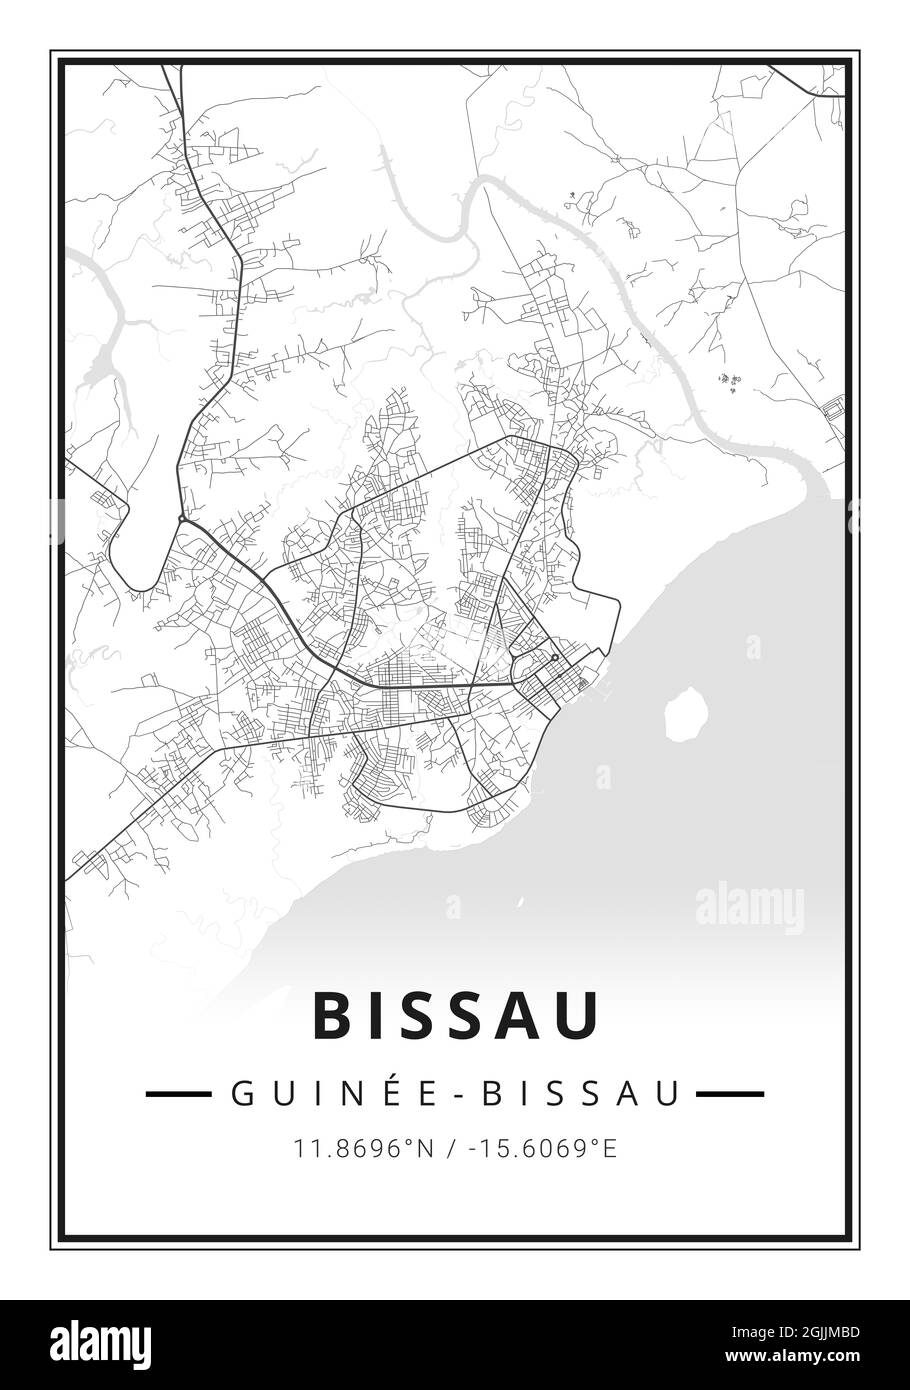 Street map art of Bissau city in Guinea Bissau - Africa Stock Photo